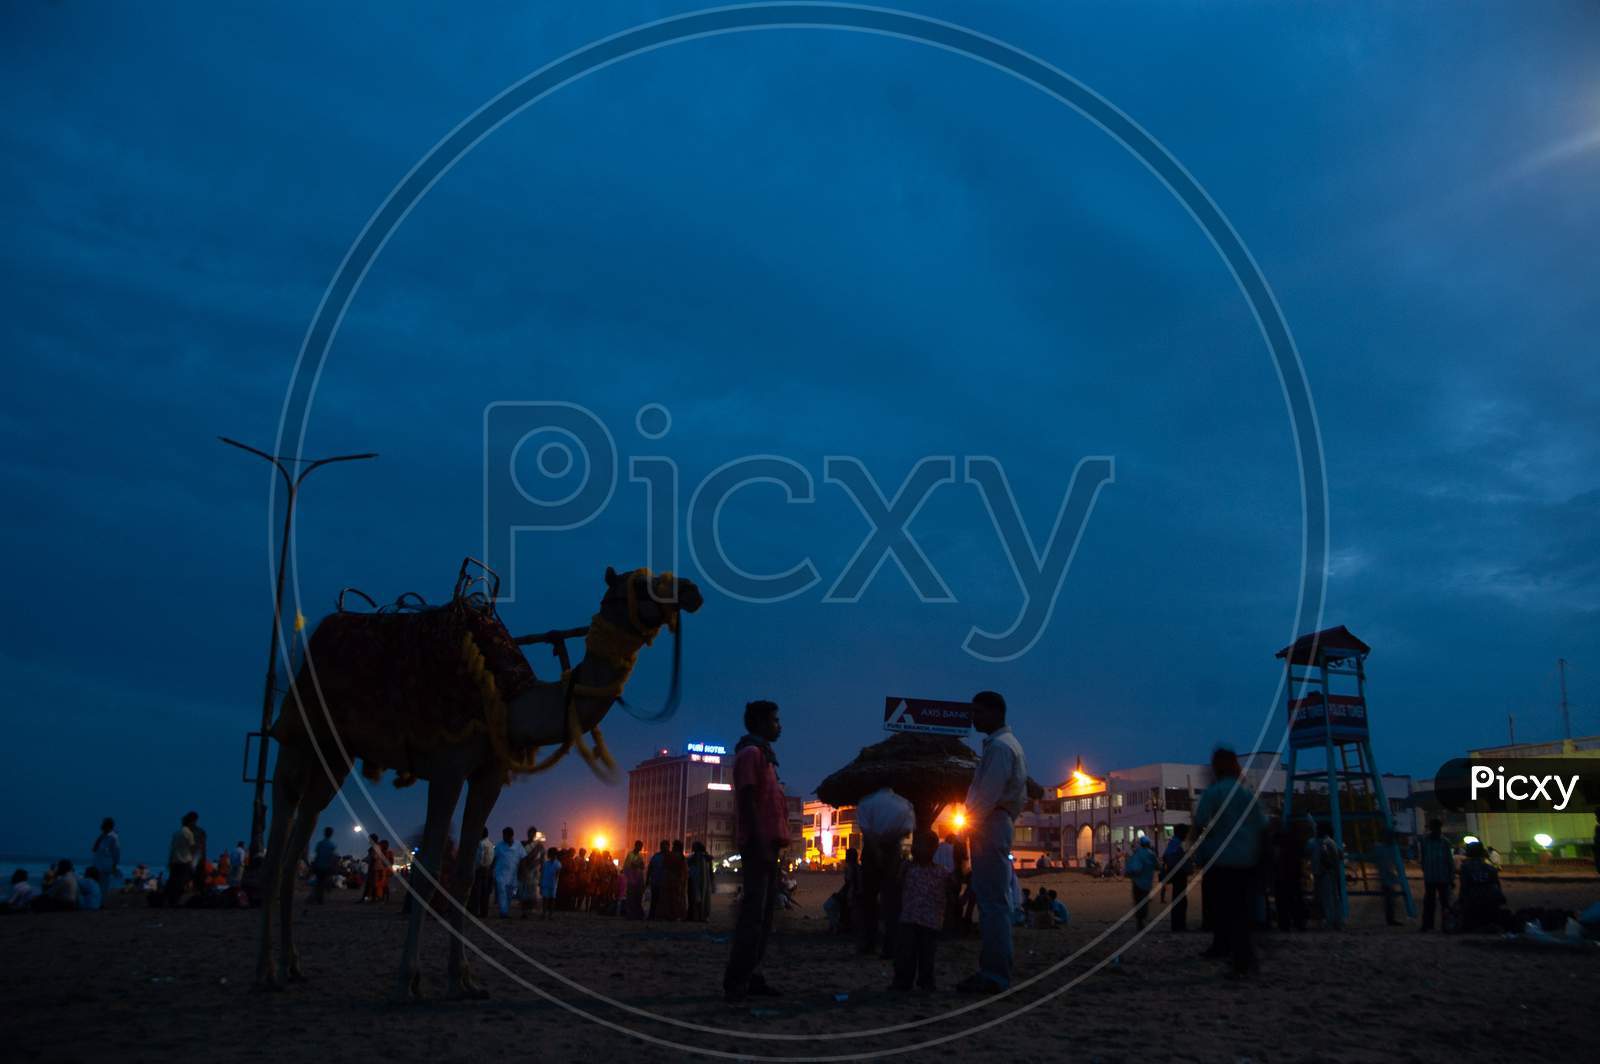 Camel rider having a conversation during evening by the beach